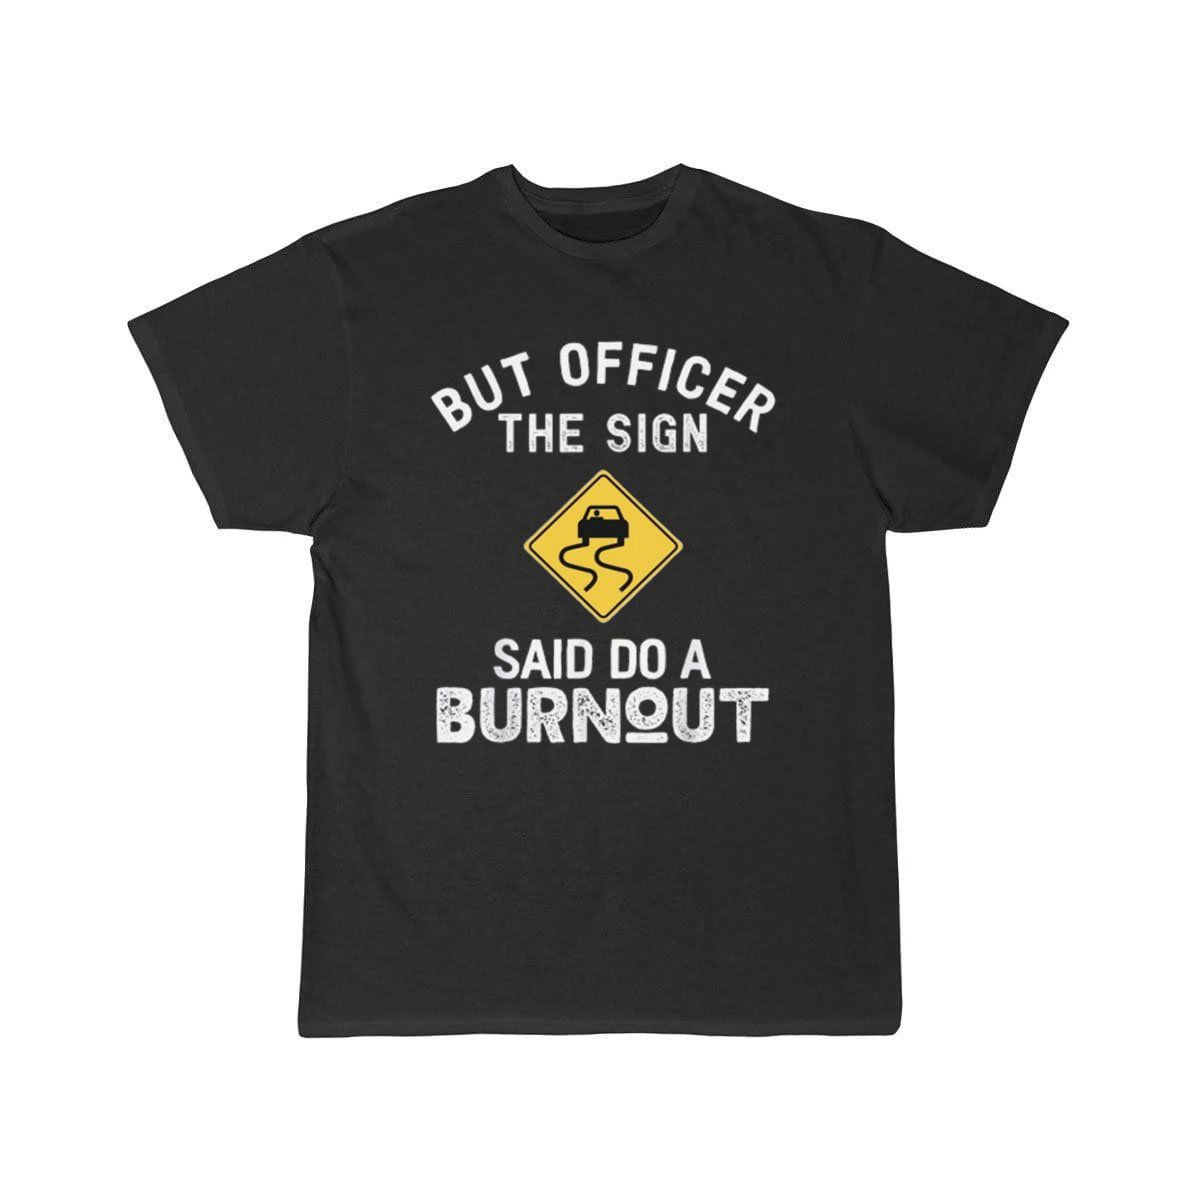 But Officer the Sign Said Do a Burnout - Funny Car  T-Shirt THE AV8R